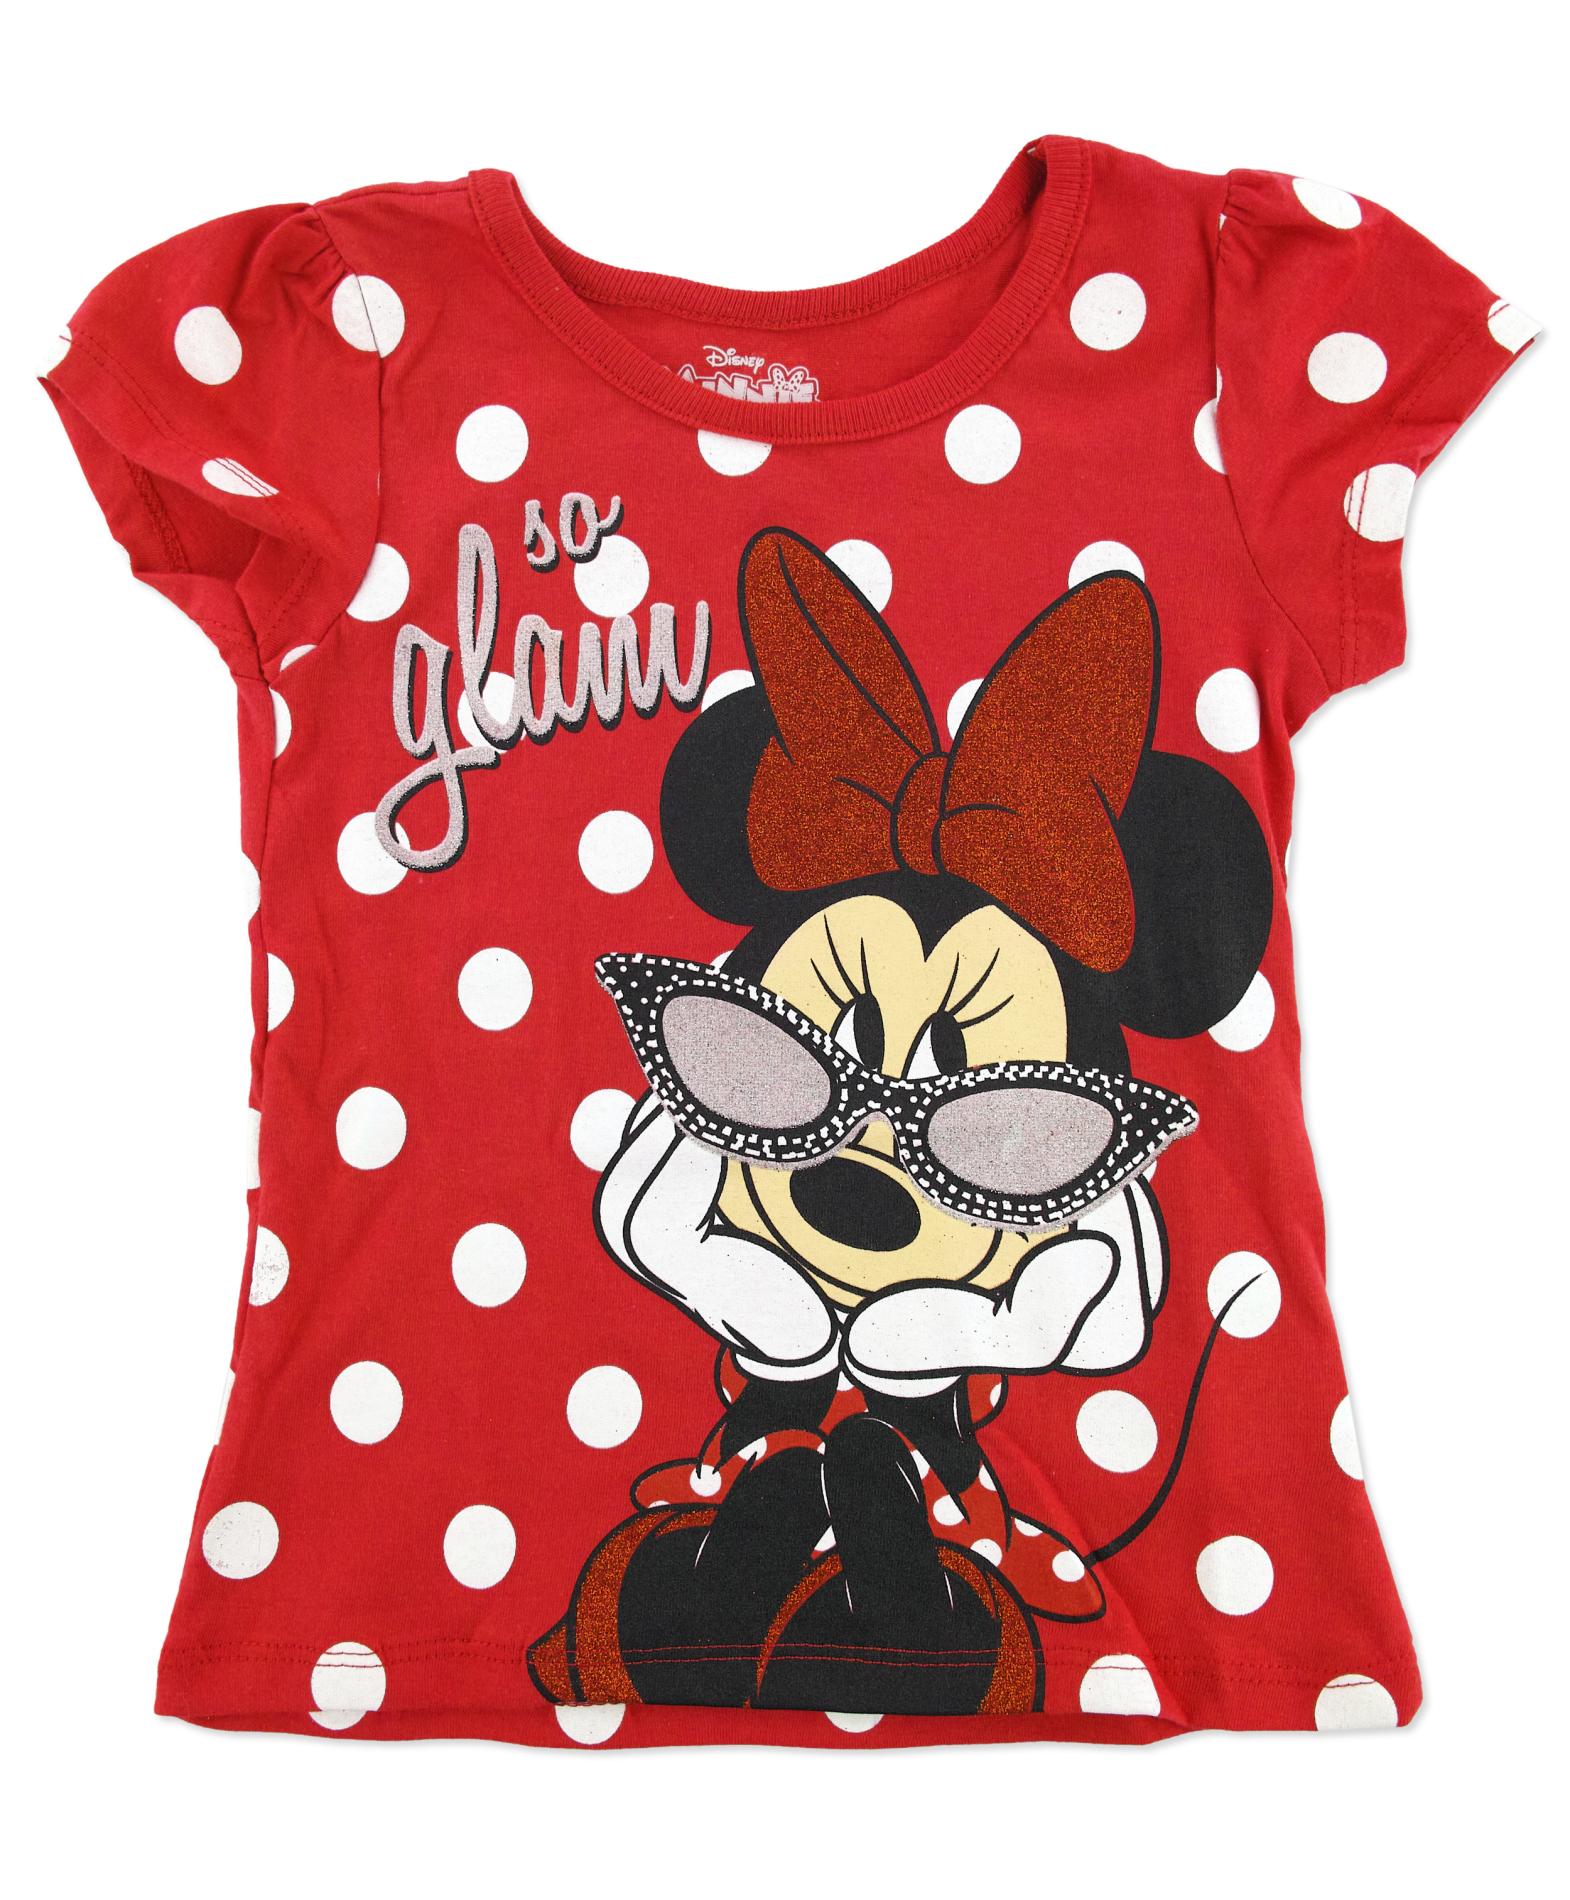 Disney Minnie Mouse Toddler Girl's Graphic T-Shirt - So Glam